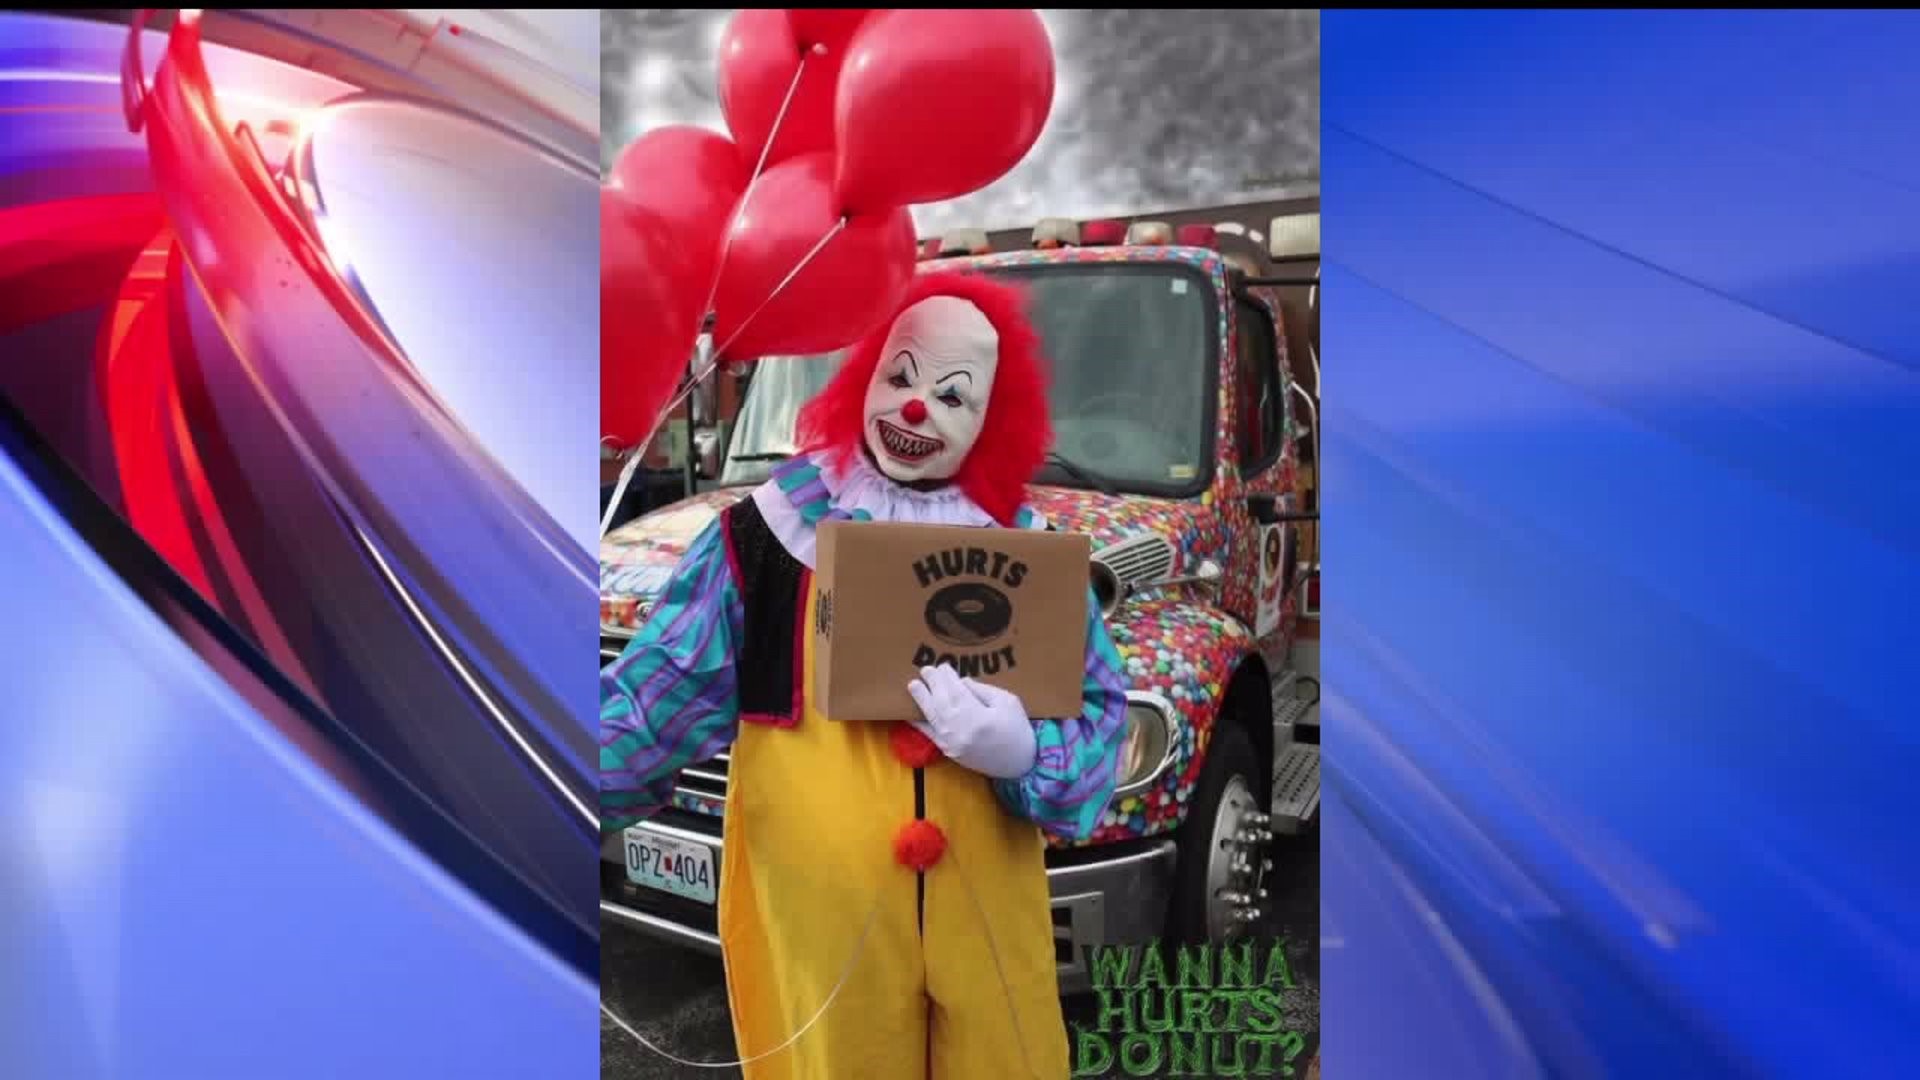 Hurts Donut Will Send A Scary Clown To Deliver Donuts And Scare